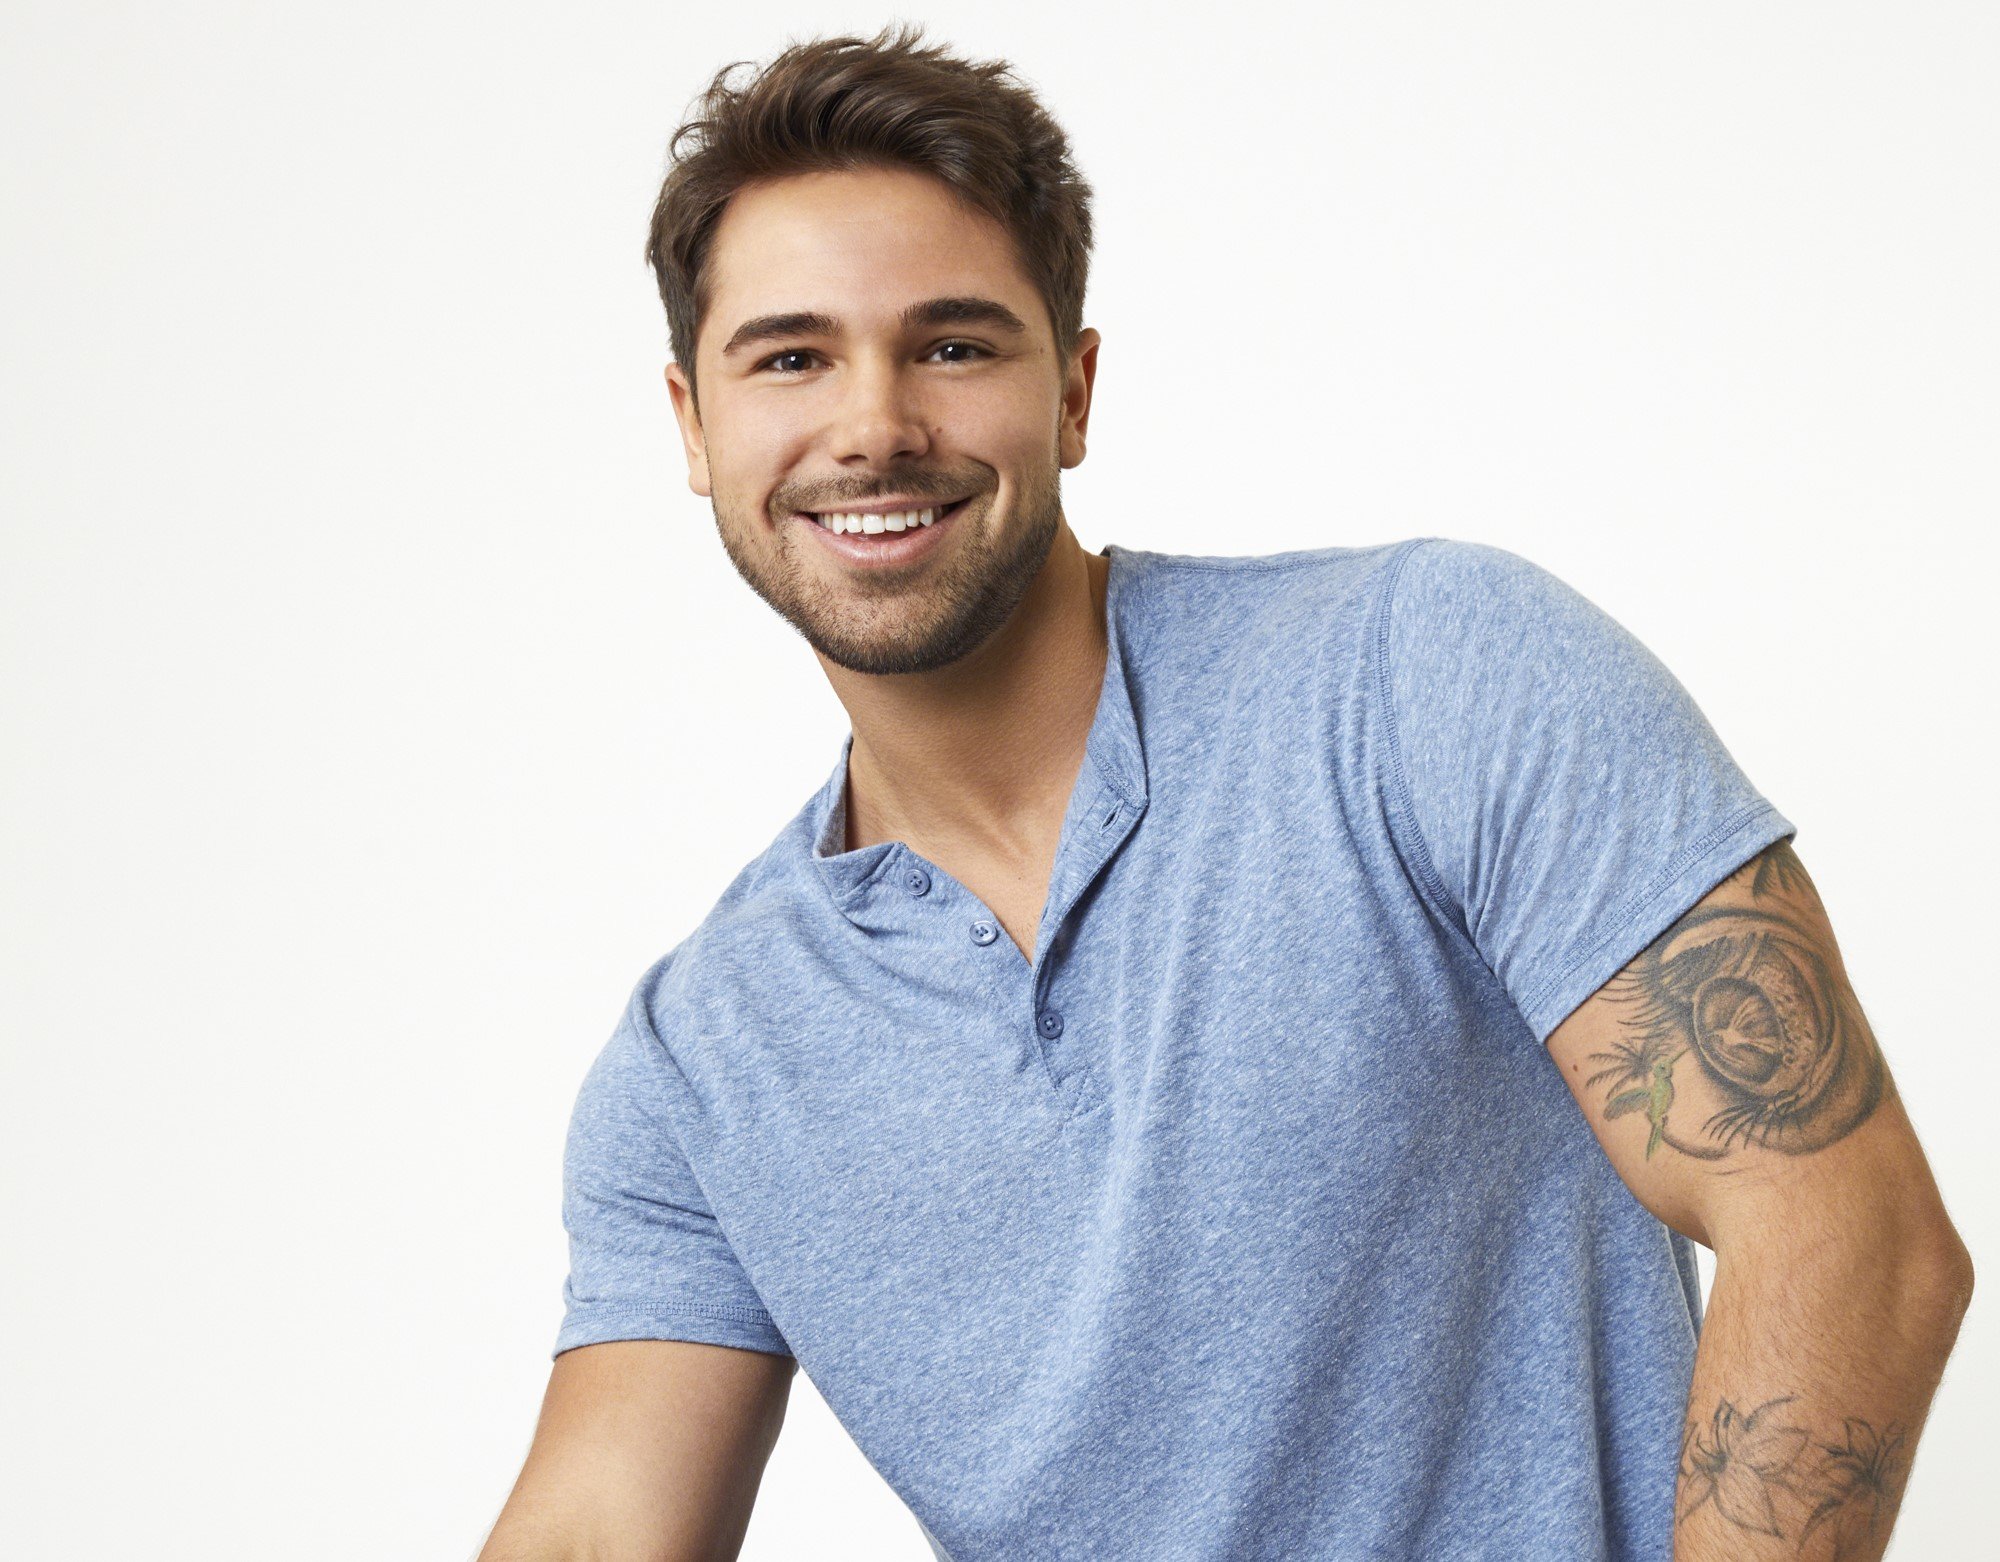 'The Bachelorette' 2022 contestant Tyler Norris. He's wearing a blue polo shirt and smiling at the camera.